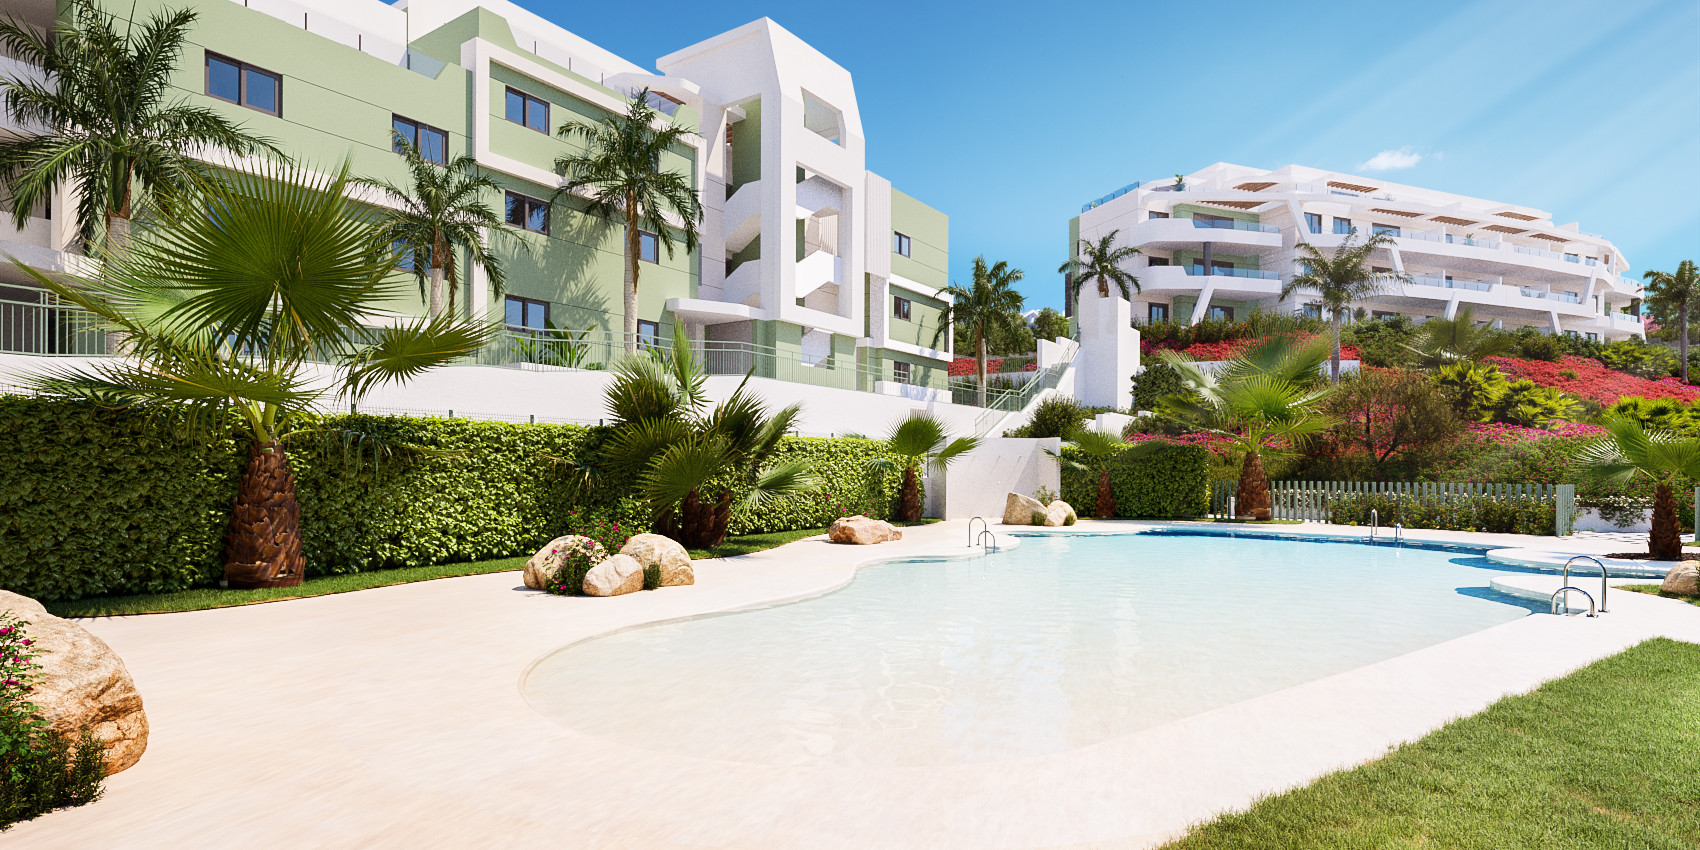 Ipanema: Modern flats and penthouses with privileged location in La Cala de Mijas. | Image 3